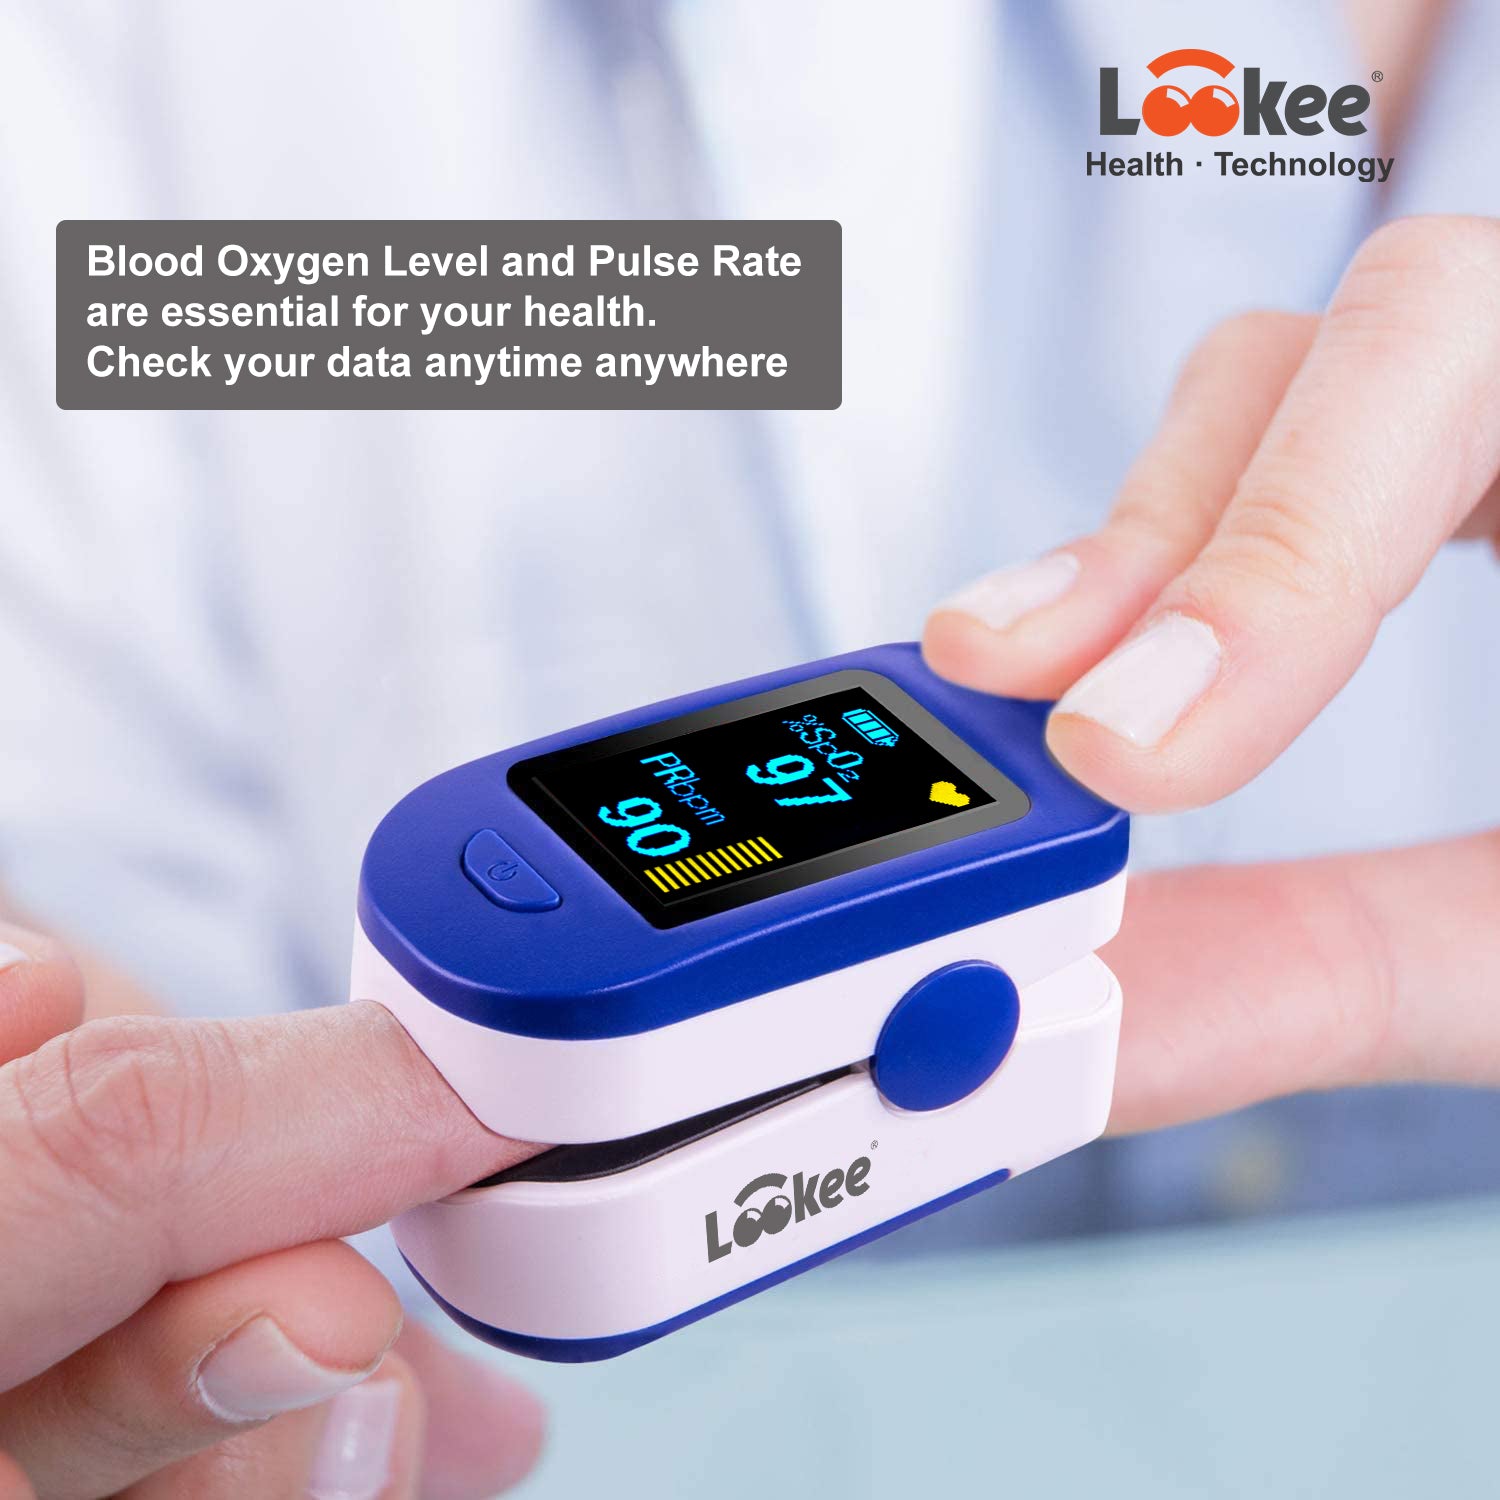 LookeeTech - FDA and CE approved, get The LOOKEE® AirBP Blood